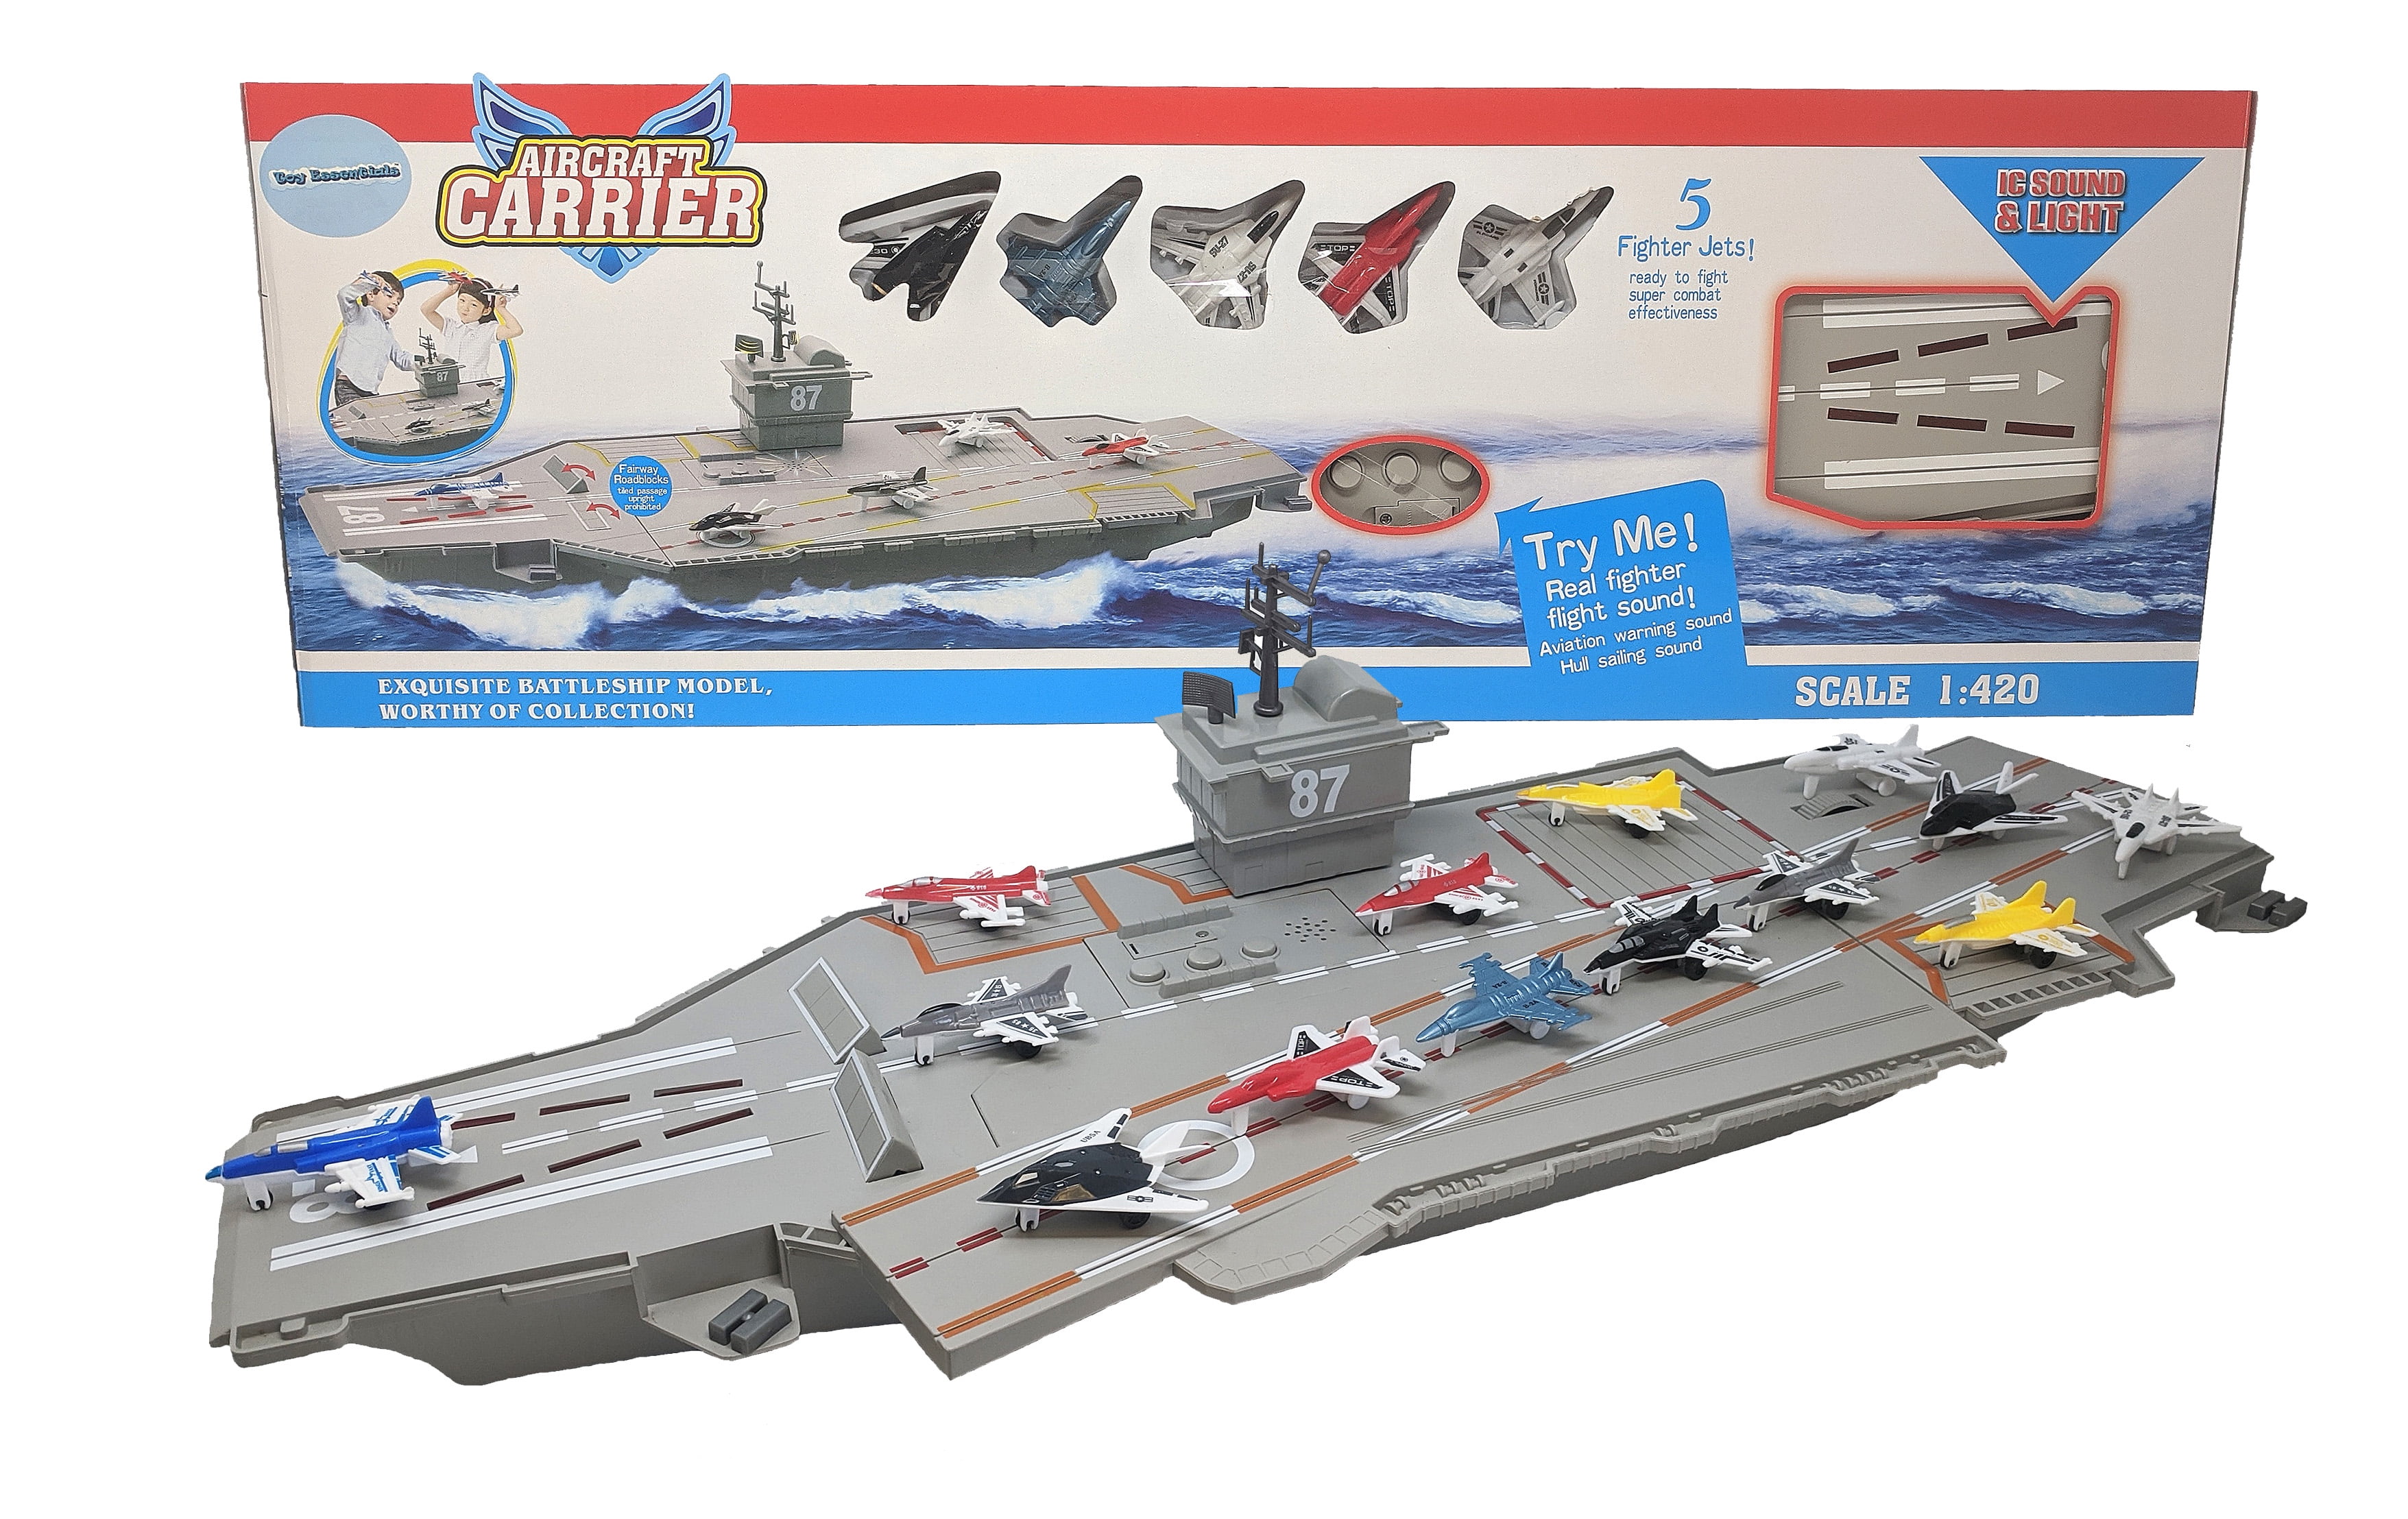 18 Fighter Jets 33 Inch Aircraft Carrier with Soldiers Jets Military Vehicles 